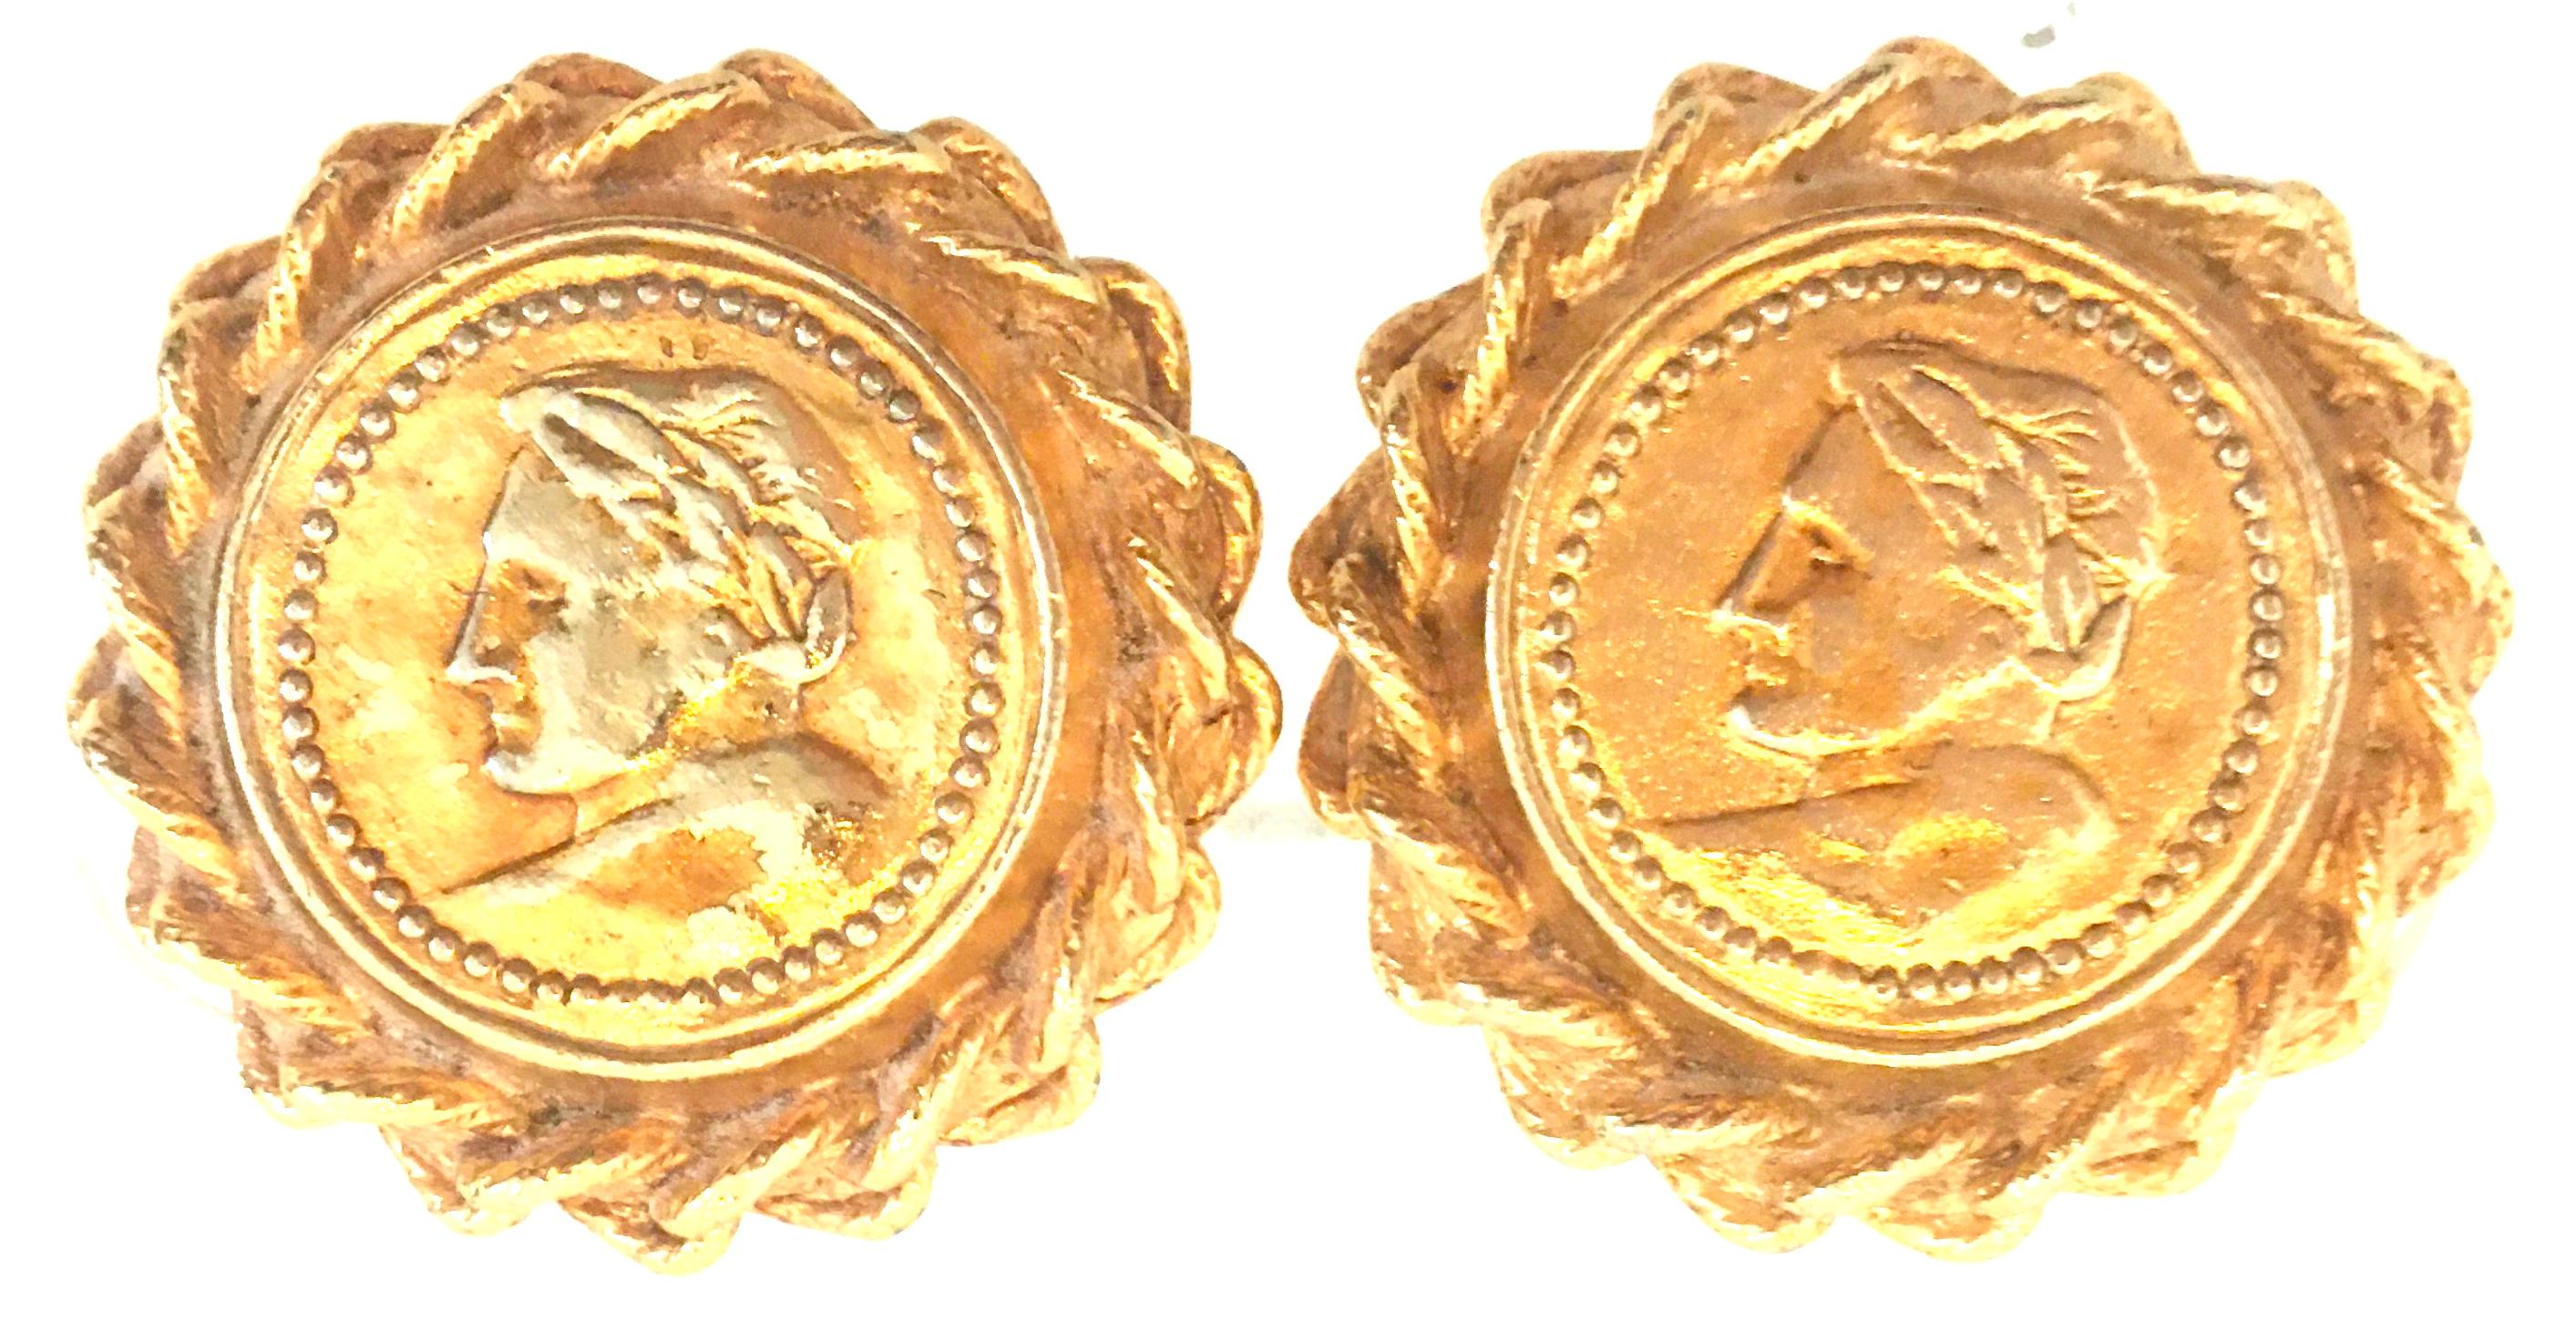 20th Century Gold Plate Roman Coin Pair Of Earrings By, Carlisle. This large pair of clip style dimensional earrings feature gold plate with raised Male Roman Bust motif, raised bead surround and large twisted rope style detail. Each earring is